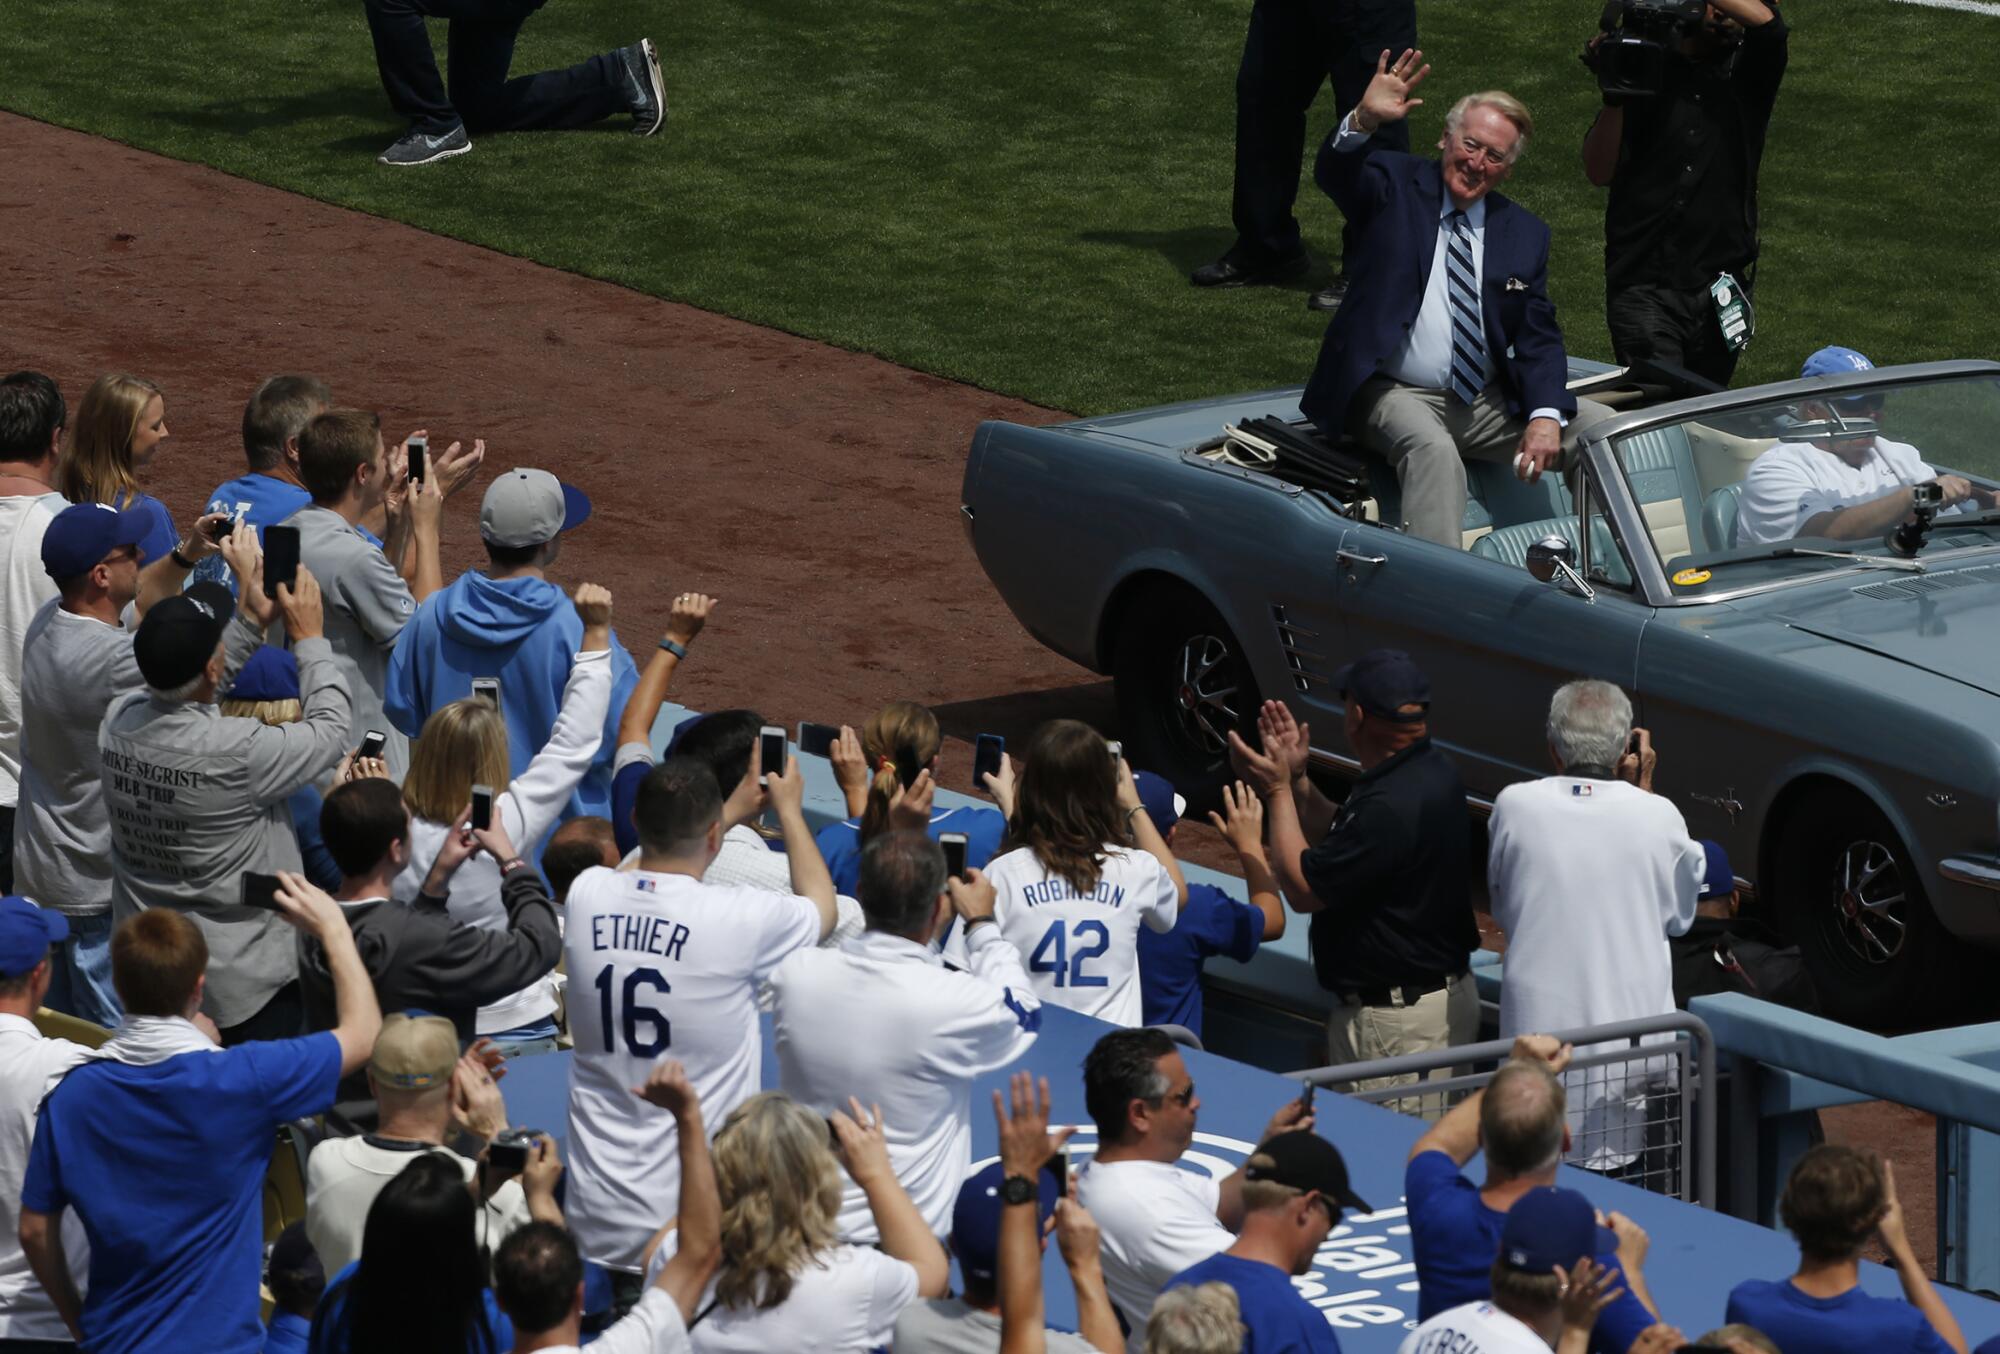 Dodgers announcer Vin Scully waves to fans as he arrives to throw the ceremonial first pitch.